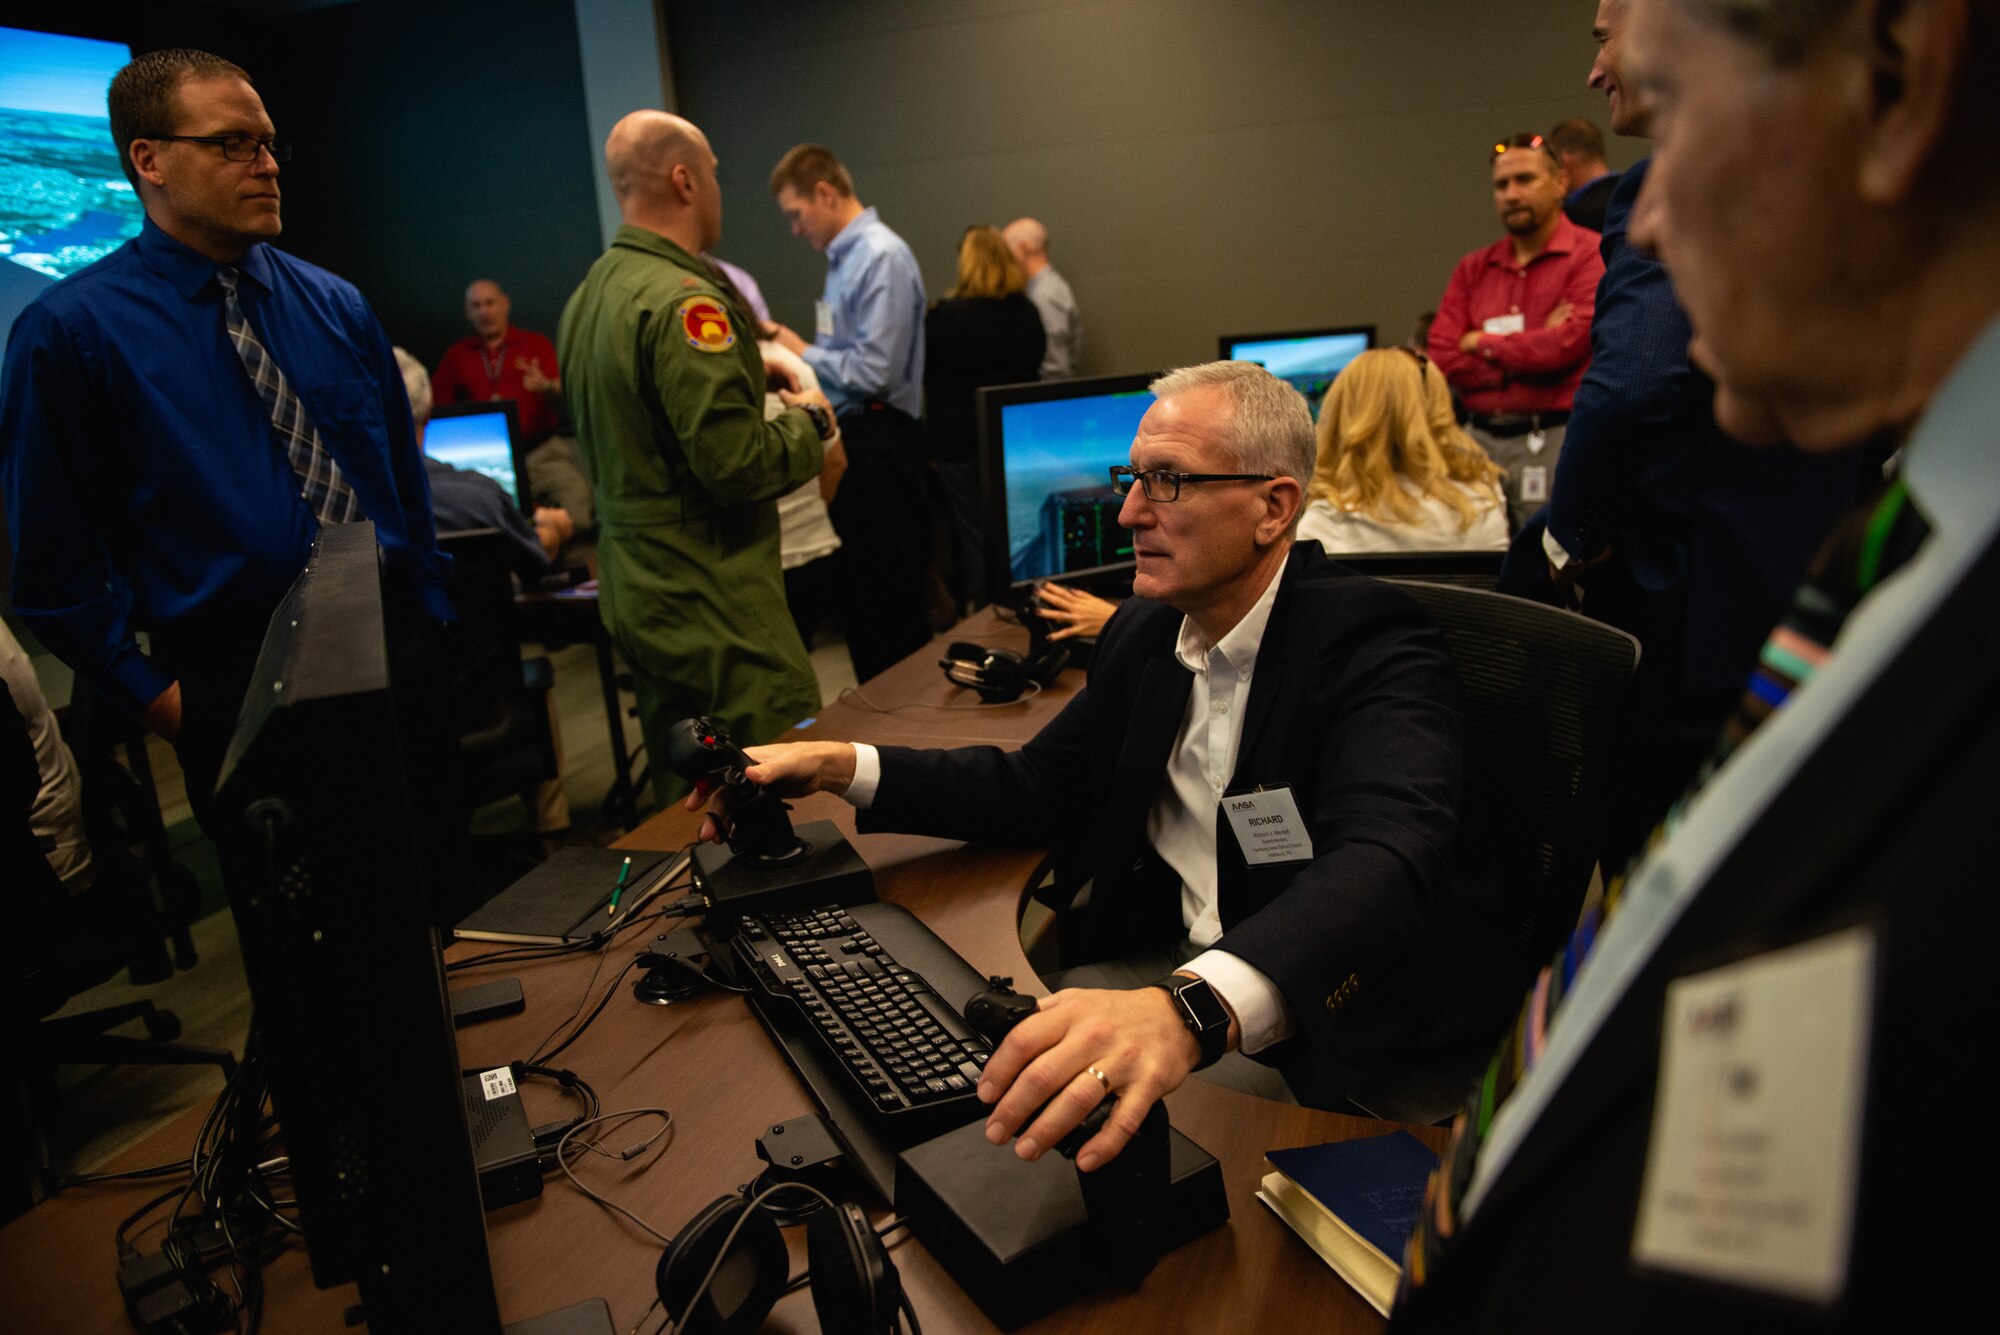 A Personalized Learning Cohort member flies a pilot training simulator during a visit to Luke Air Force Base, Ariz., Nov. 2, 2018. Throughout the tour, members of the cohort were given the opportunity to speak with Airmen and receive a comprehensive review of some of the resources and tools used to train fighter pilots. (U.S. Air Force photo by Senior Airman Alexander Cook)